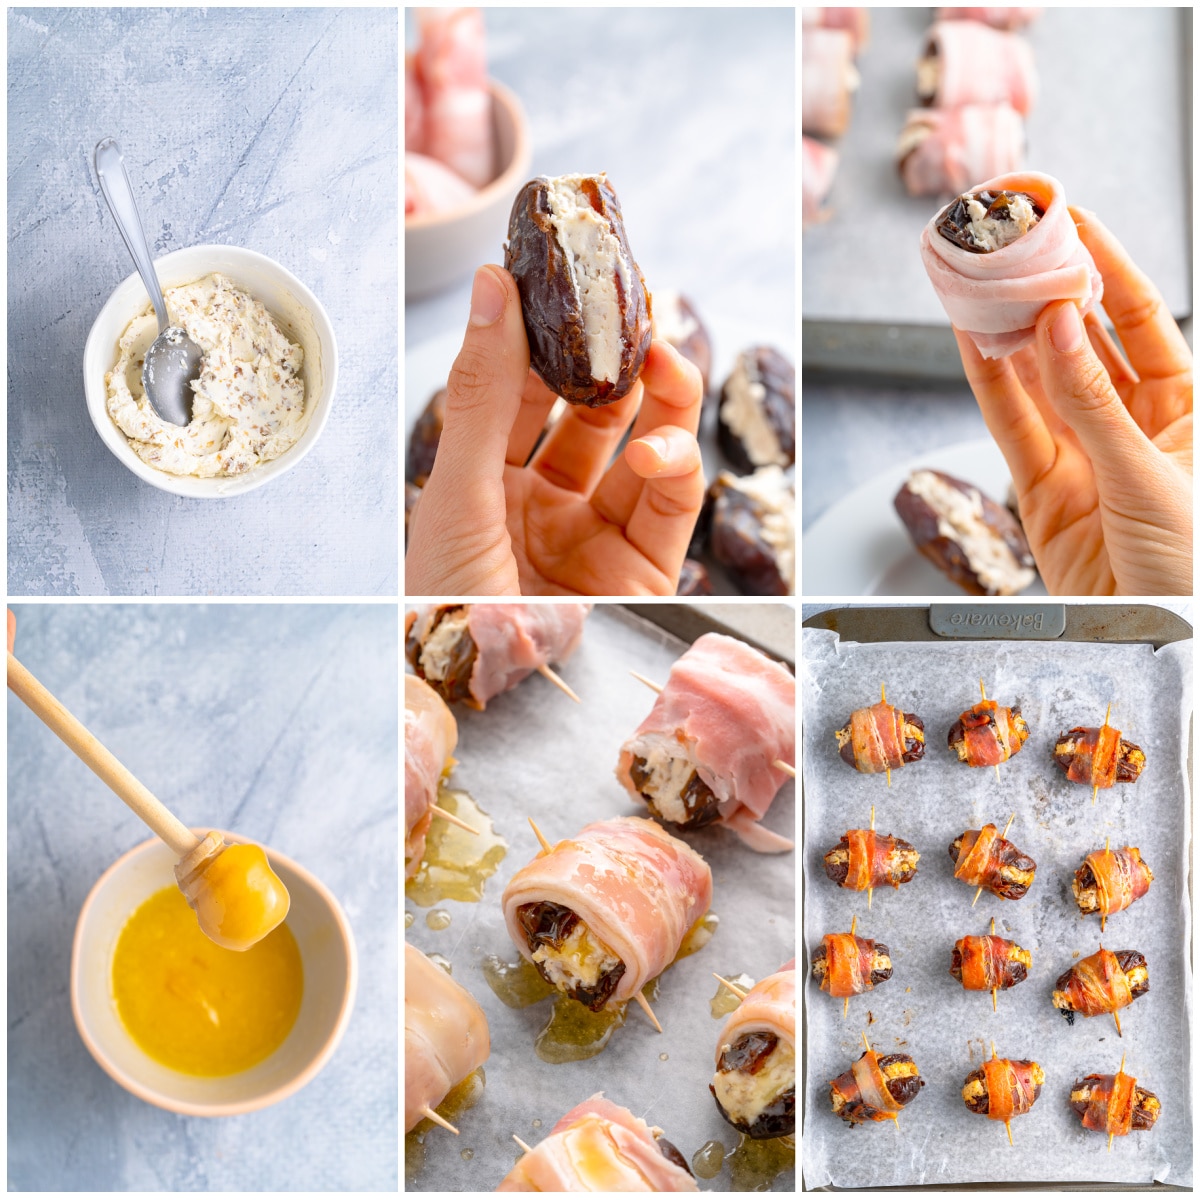 Step by step photos on how to make Bacon Wrapped Dates.